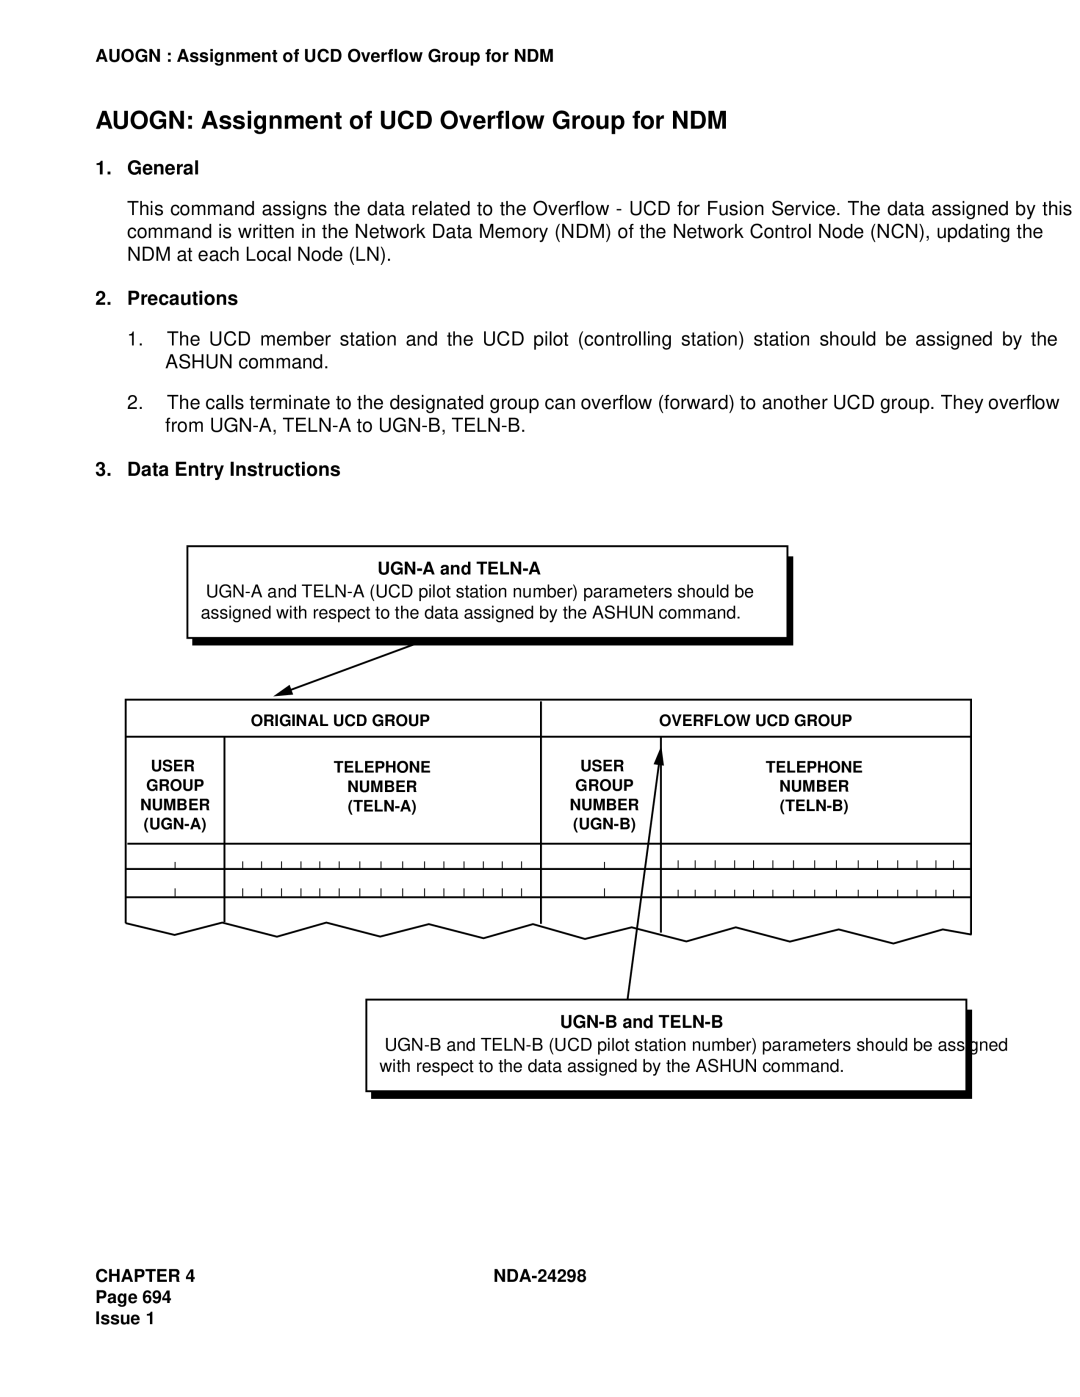 NEC NDA-24298 manual Auogn Assignment of UCD Overflow Group for NDM 